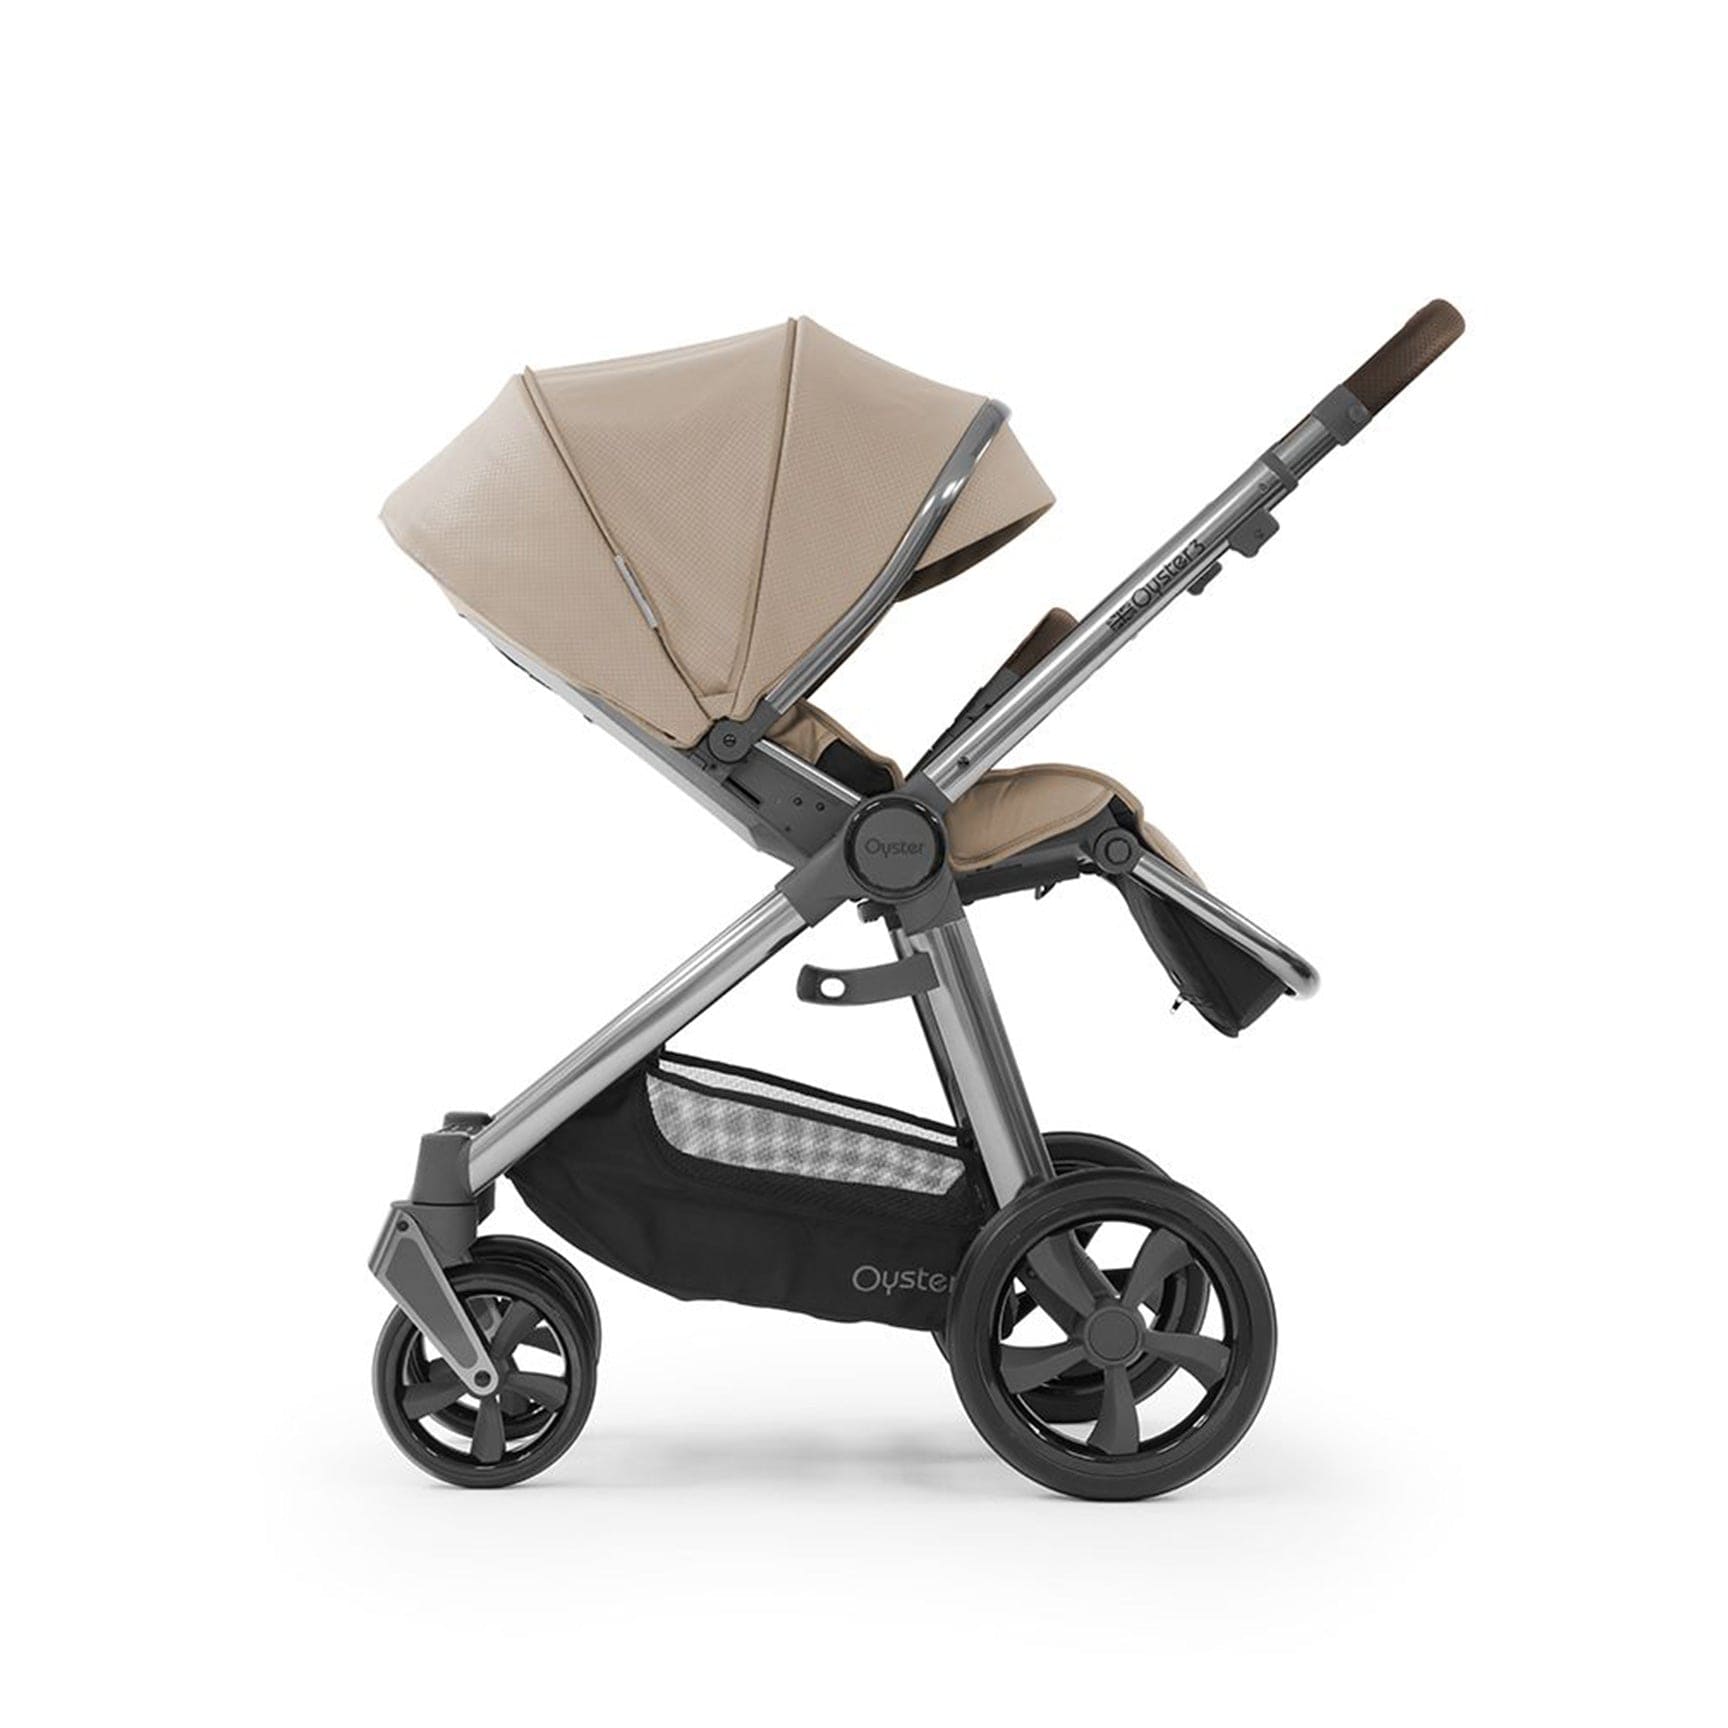 BabyStyle baby prams BabyStyle Oyster3 Pram & Carrycot Butterscotch 13460-BTS